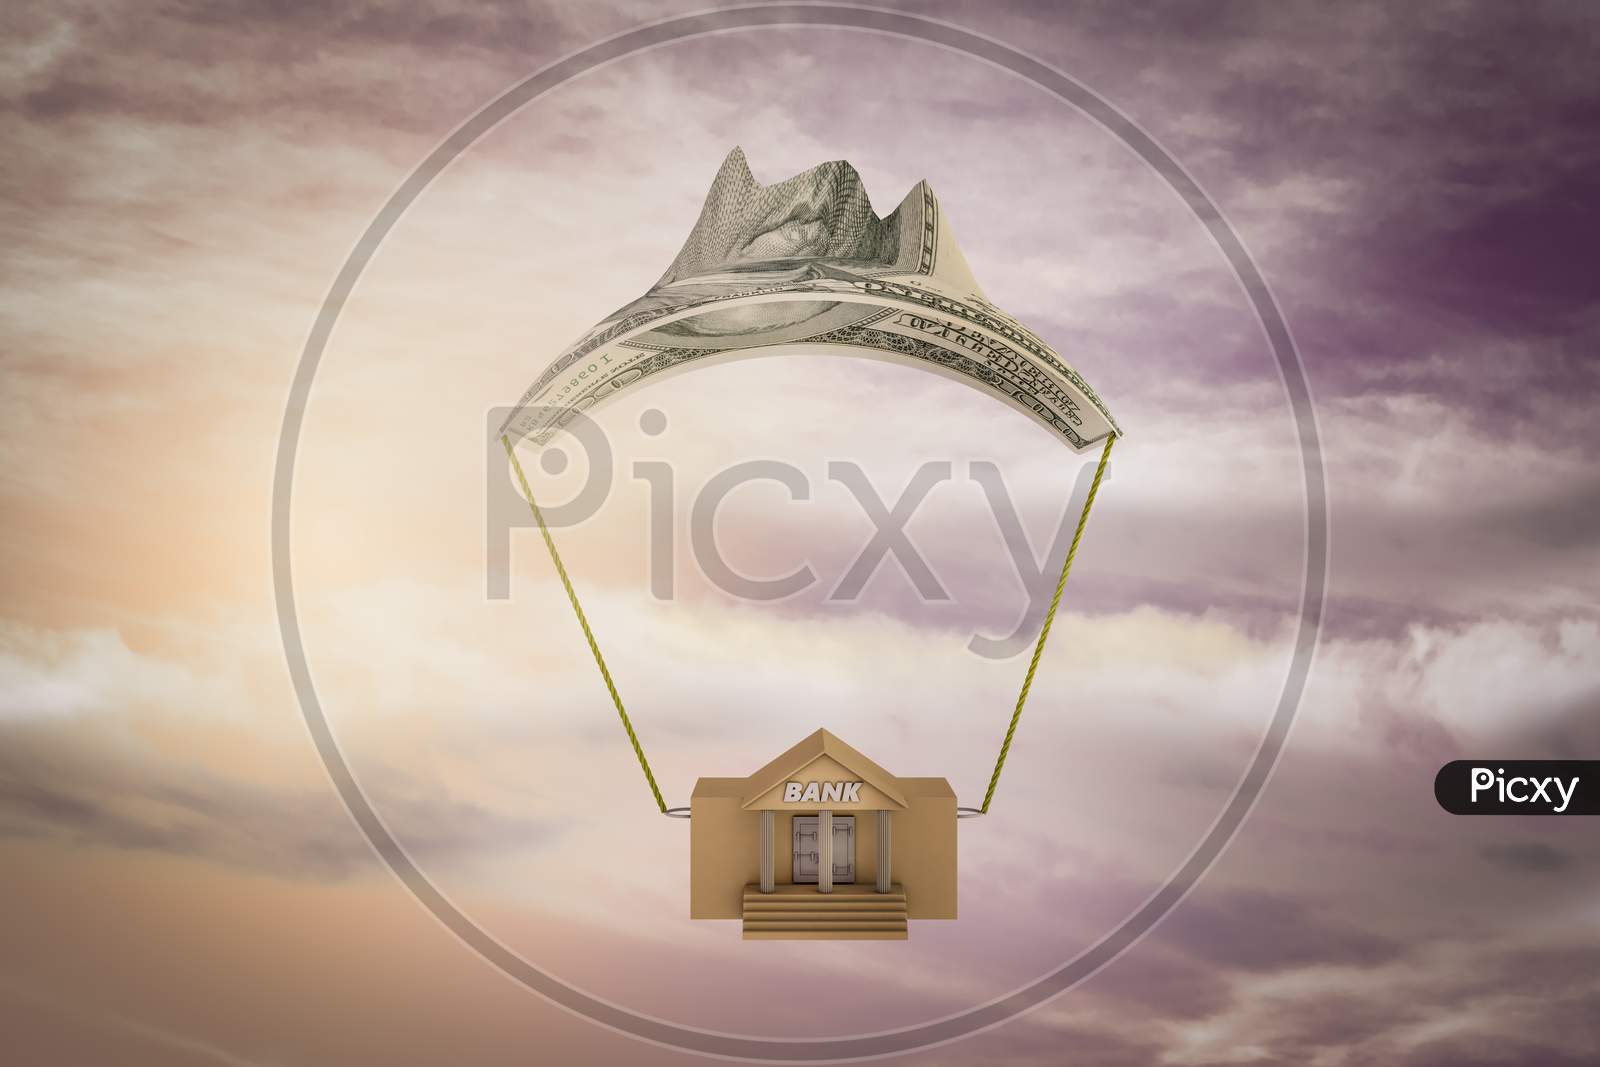 Damaged Air Balloon In A Shape Of Dollar Falling Carried A Bank Building At Sunset Magenta Day. Markets Fall Or Business Loss Or Investment Lost Or Financial Failure Or Crisis Concept. 3D Illustration